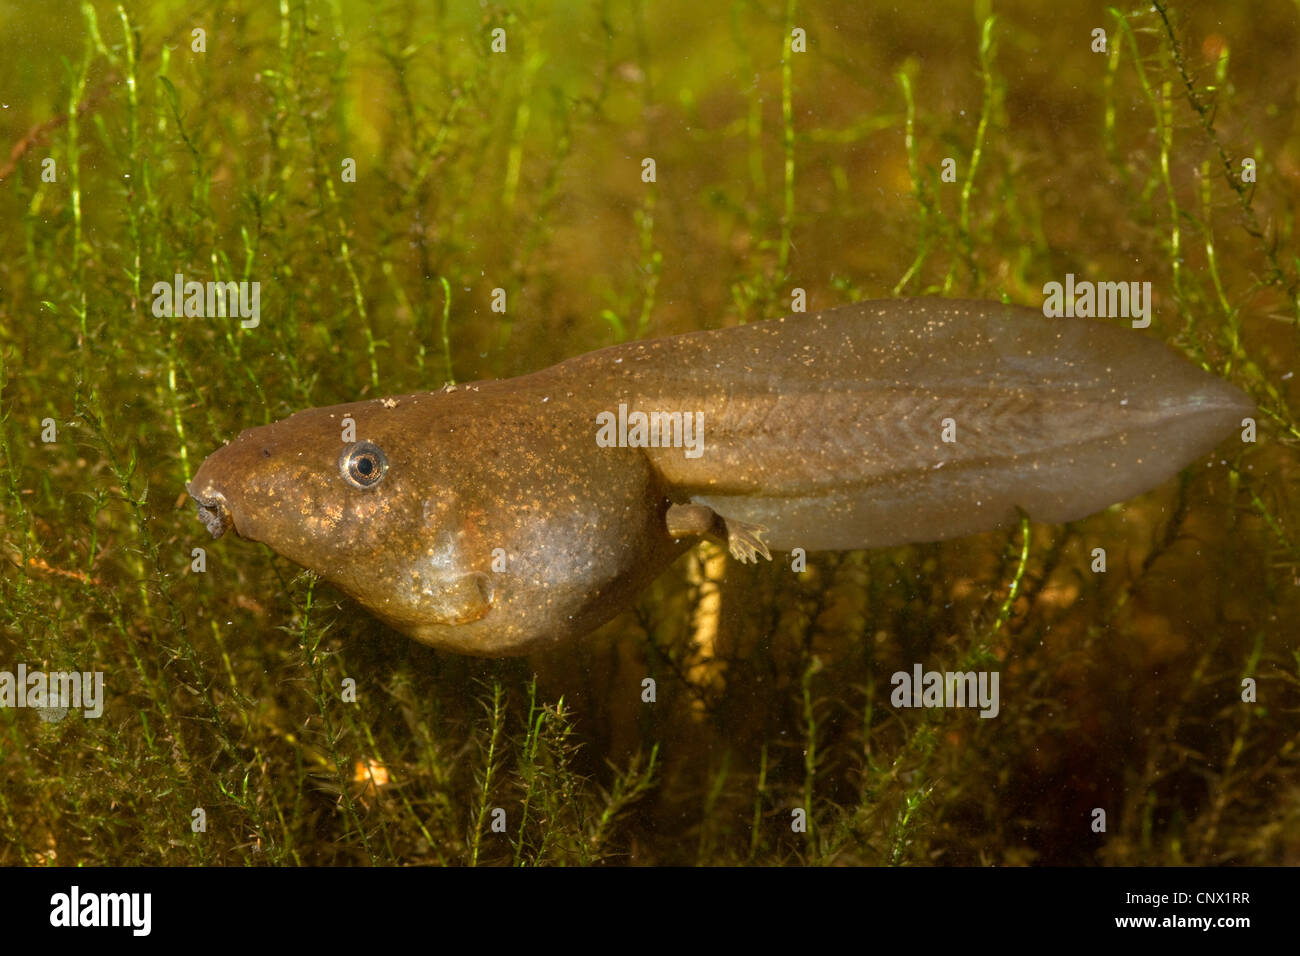 common spadefoot, garlic toad (Pelobates fuscus), tadpole with short hind legs Stock Photo